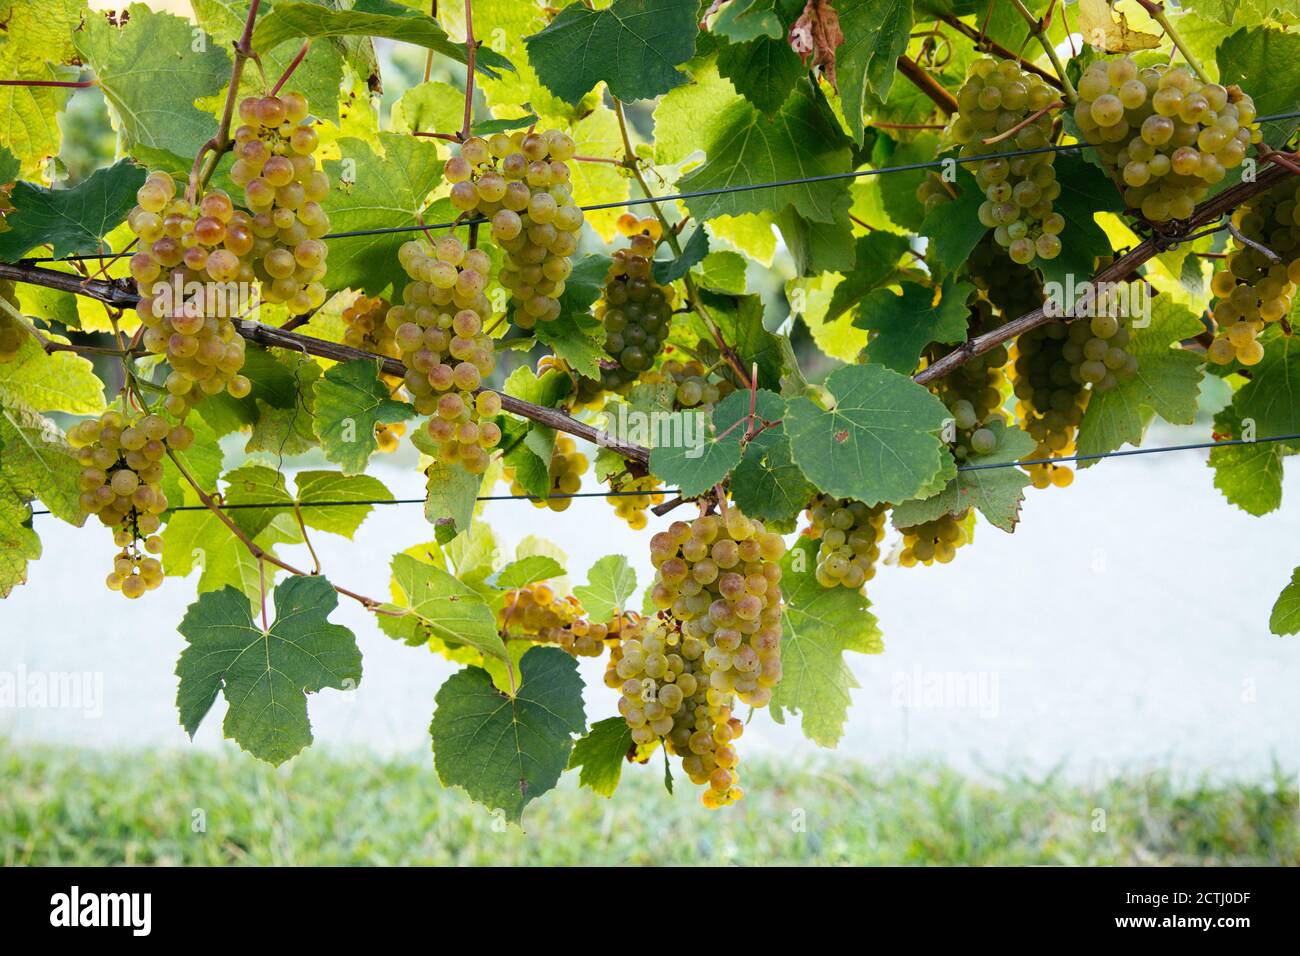 Bunches of white grape to produce basque txakoli wine hanging in the vine with trellises Stock Photo